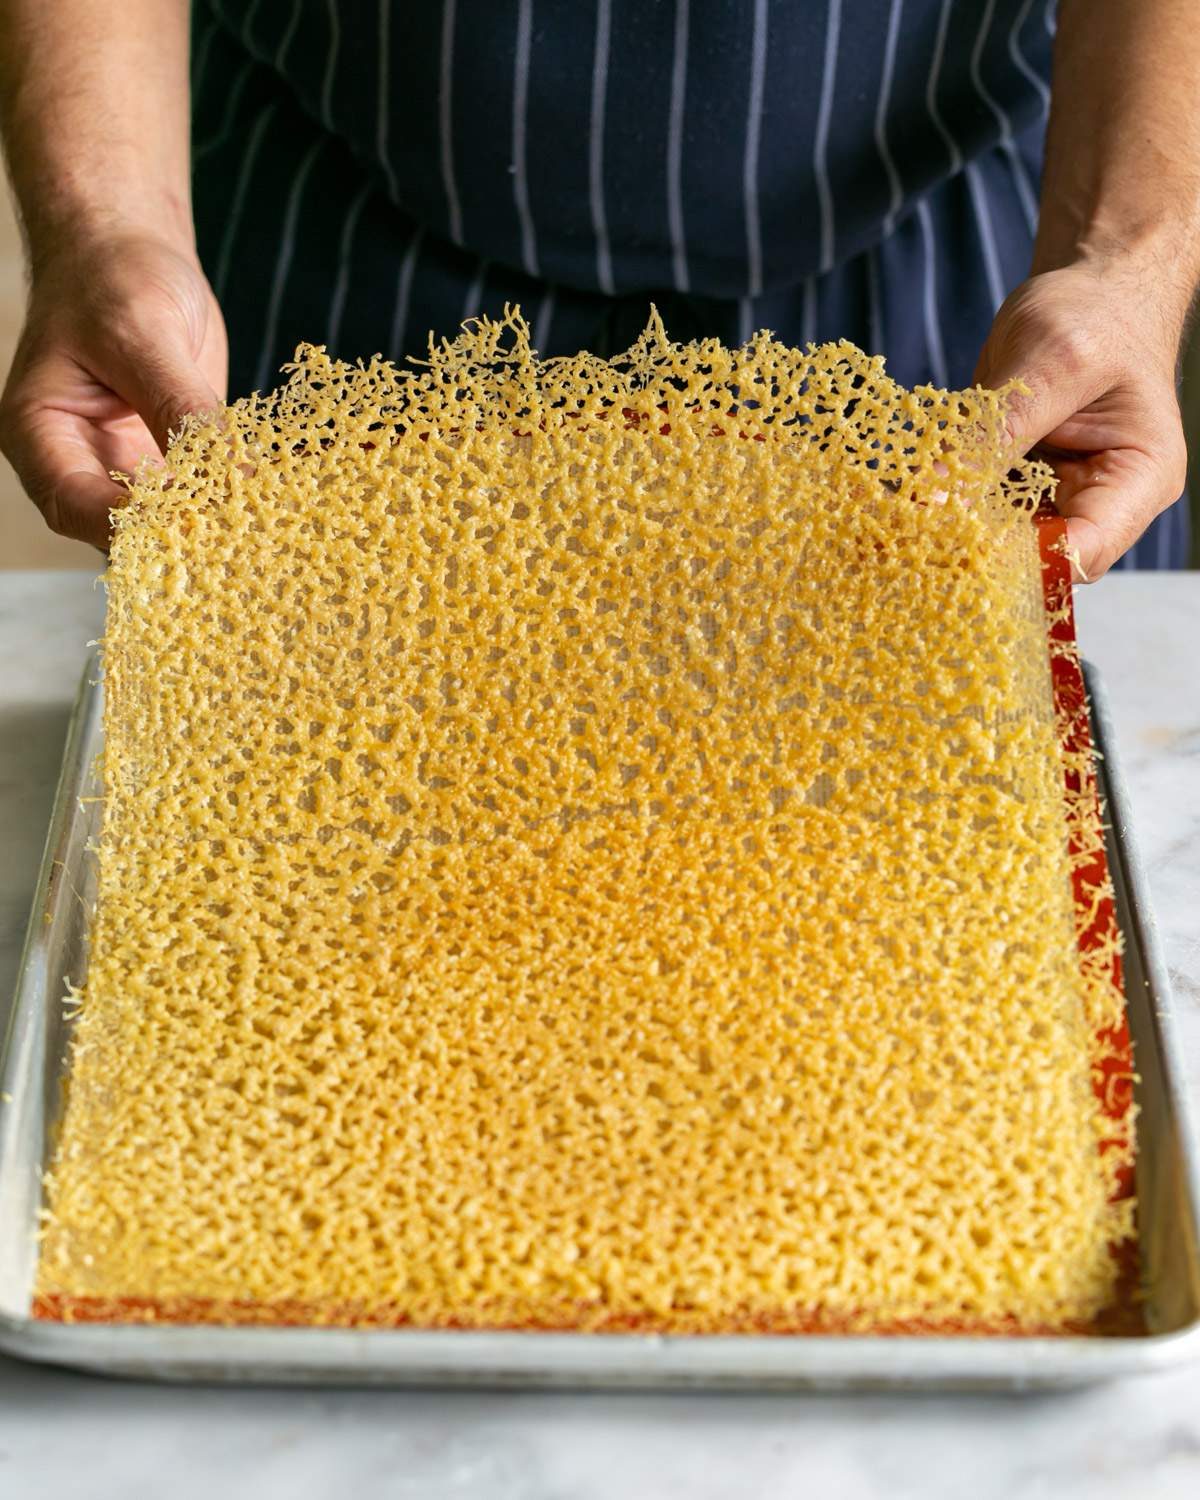 Parmesan cheese crisp out of the oven